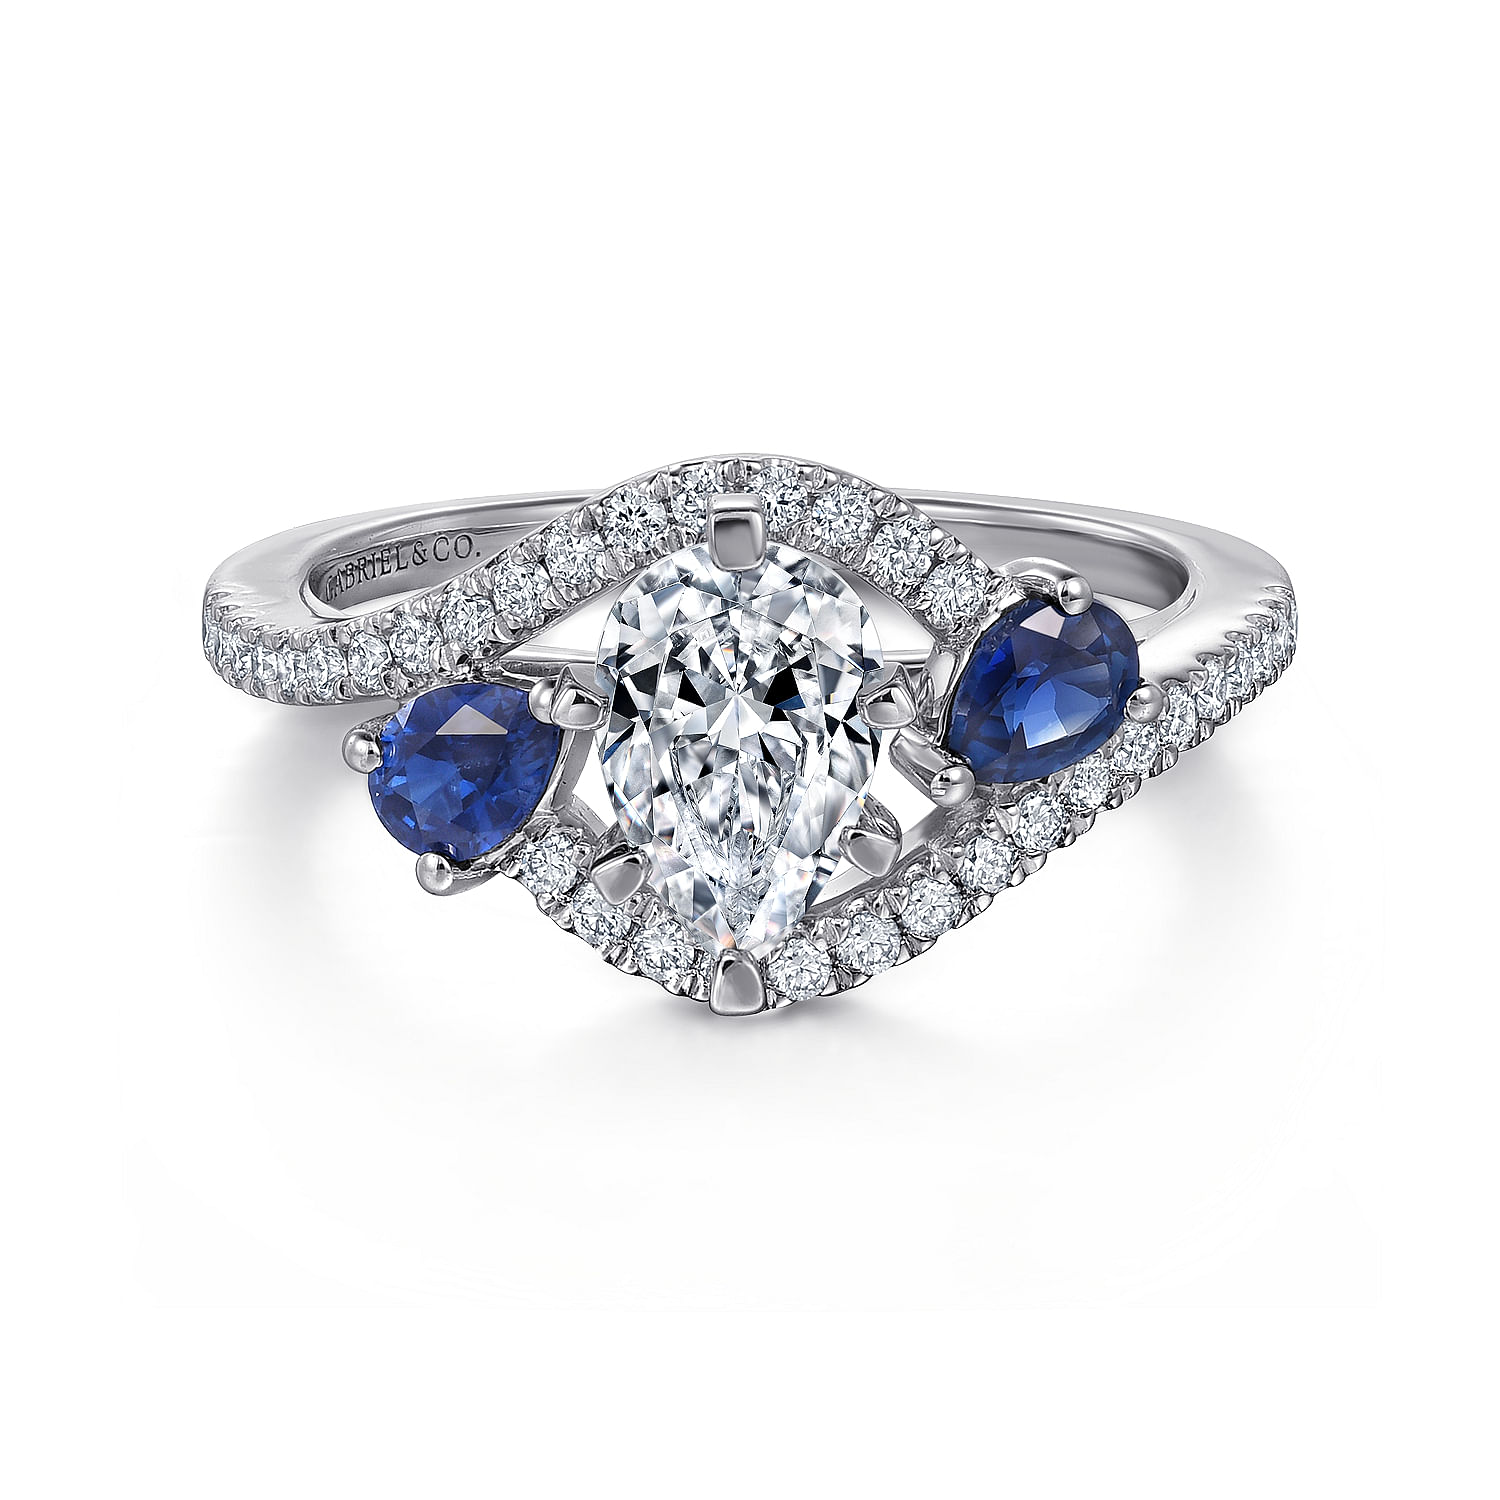 14K White Gold Pear Shape Three Stone Sapphire and Diamond Engagement Ring